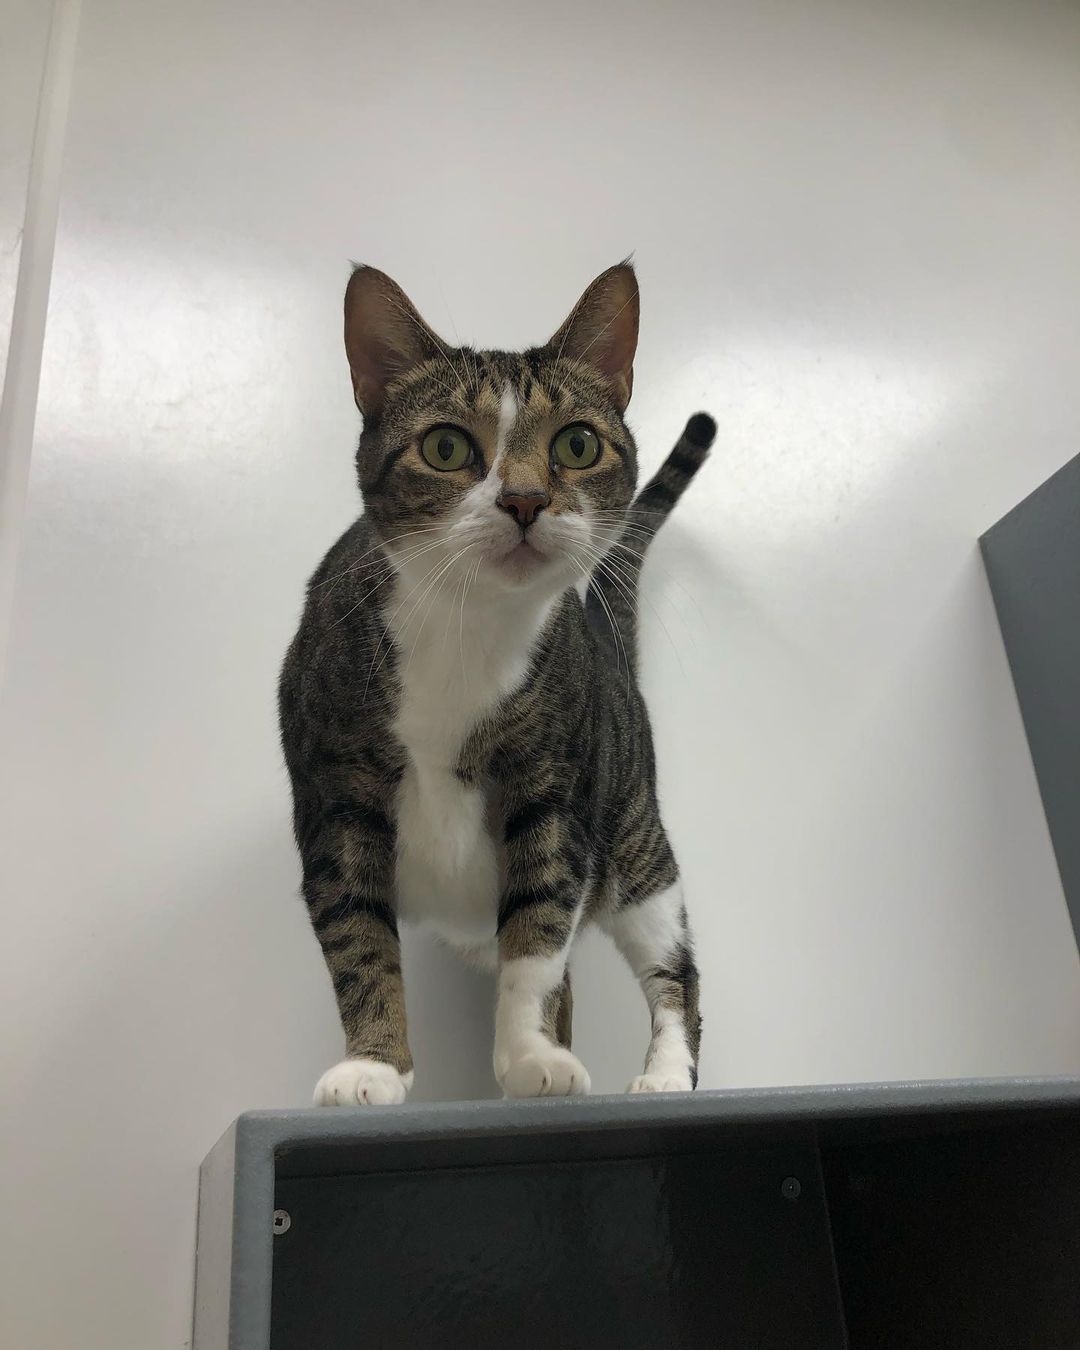 This is Joy! ☀️ She’s 4 years old and loves to climb her way to the top of everything! 😼
Joy needs to be an only child, but would bring all the ~joy~ you need in your life if you adopt her!! 😸
She’s located at PetSmart in Tyrone, come say hi to her!! 
<a target='_blank' href='https://www.instagram.com/explore/tags/kitty/'>#kitty</a> <a target='_blank' href='https://www.instagram.com/explore/tags/adopt/'>#adopt</a> <a target='_blank' href='https://www.instagram.com/explore/tags/meow/'>#meow</a>